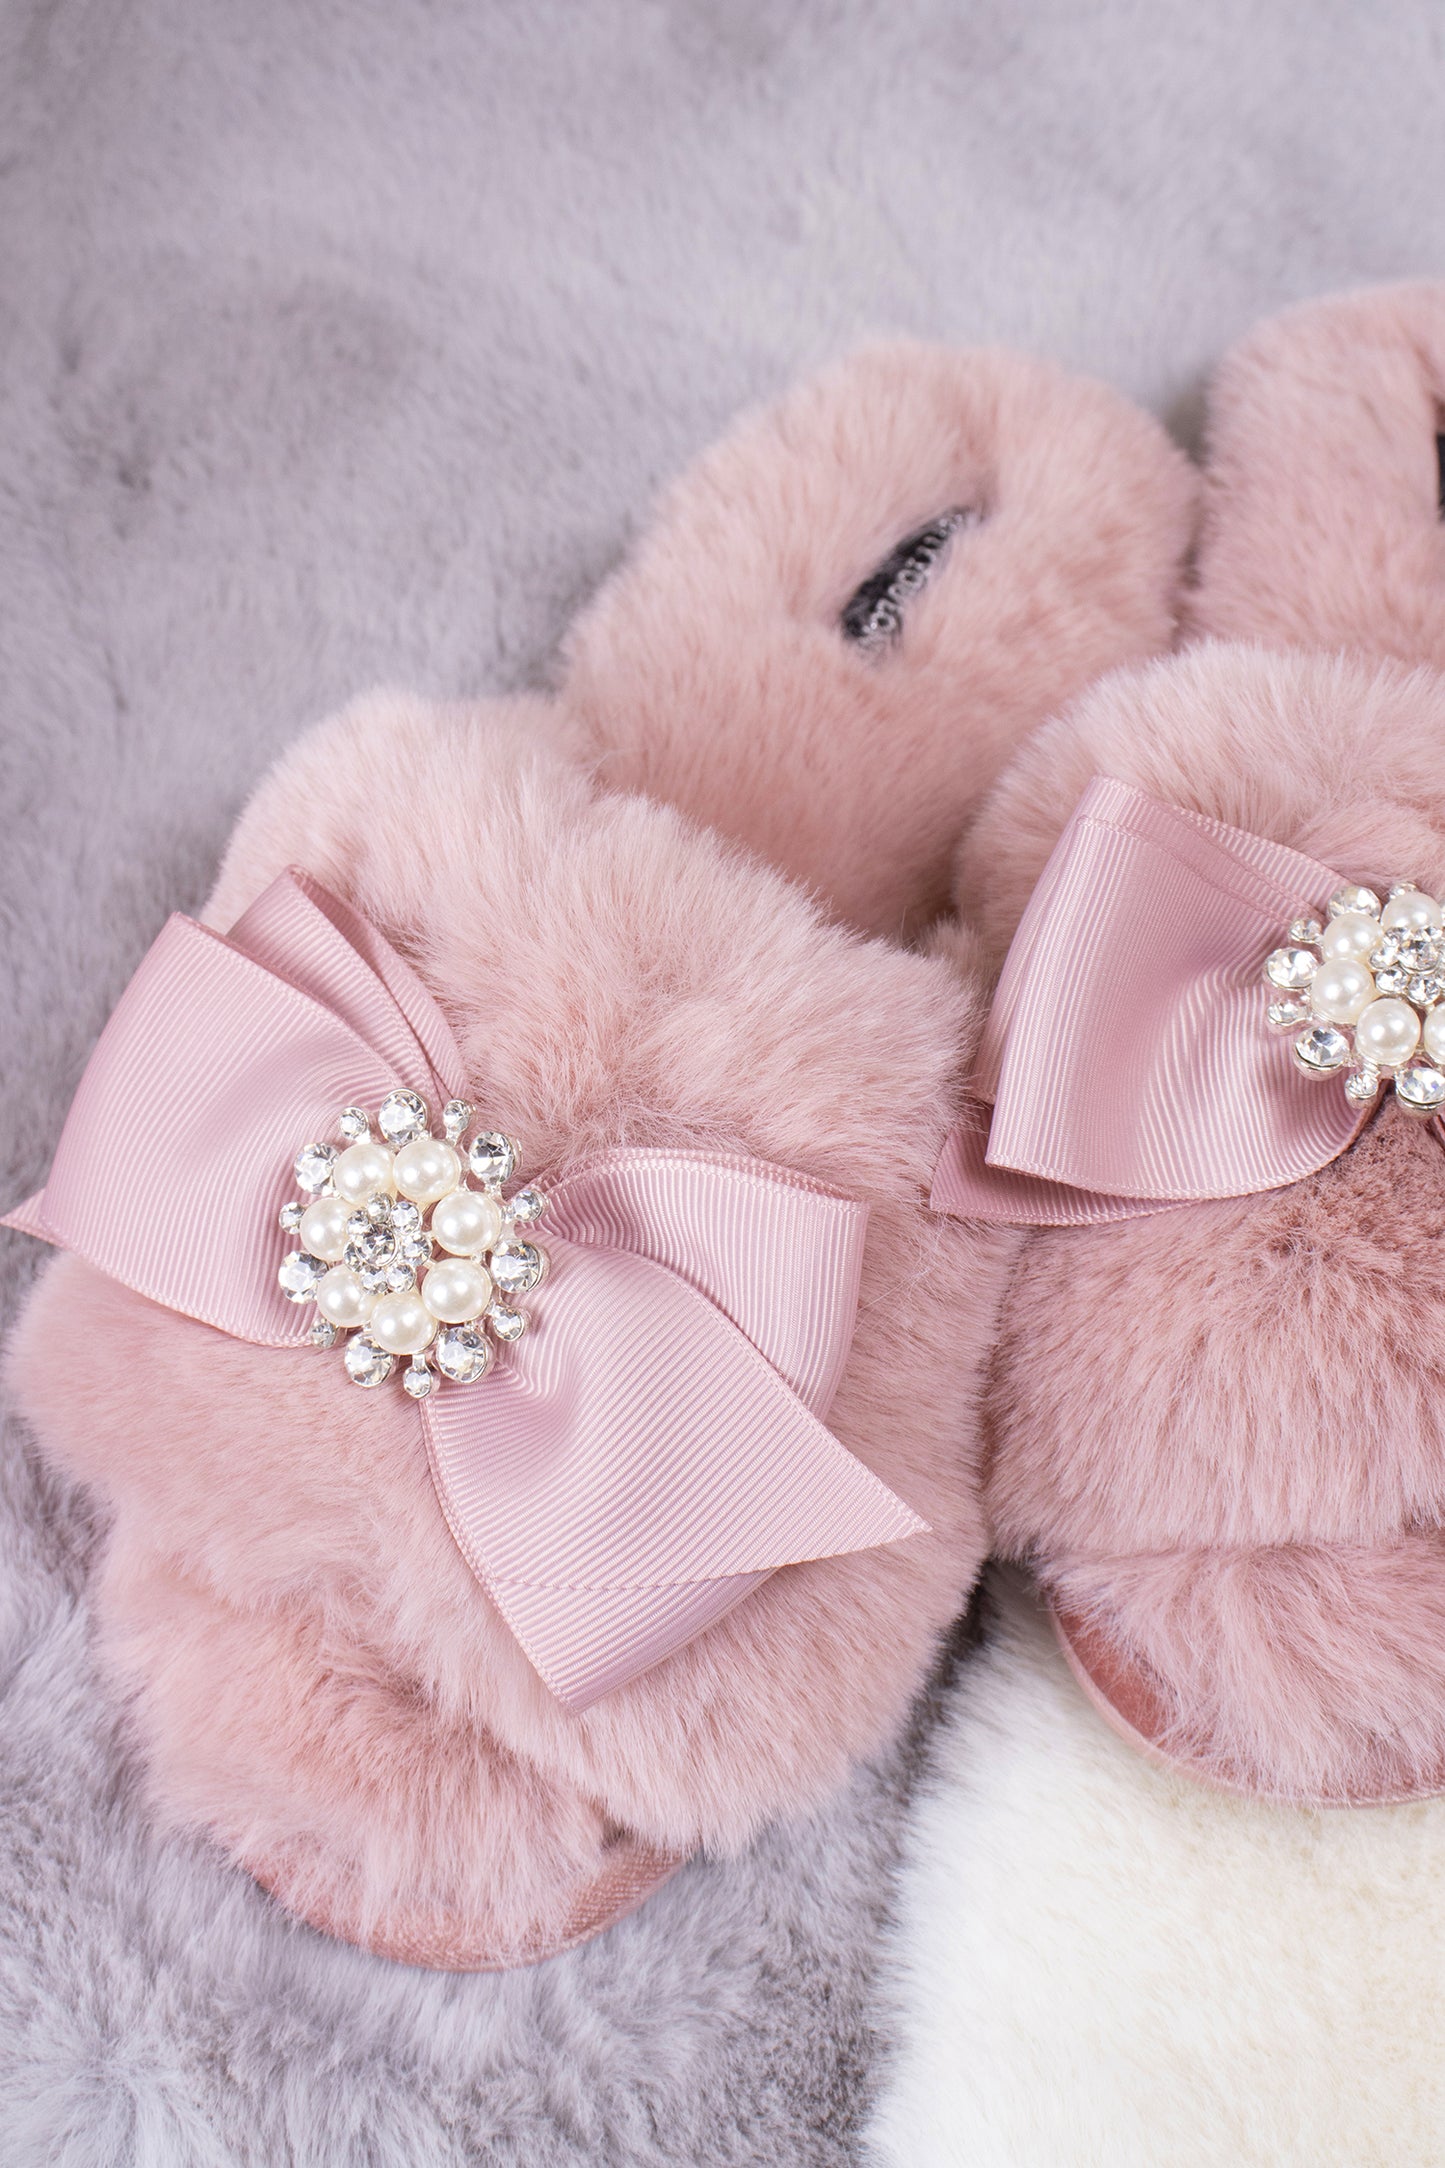 
                  
                    Anya women's slider slippers in pink using the softest faux furs and topped with a premium grosgrain bow finished with a jewel pearl embellishment from Pretty You London
                  
                